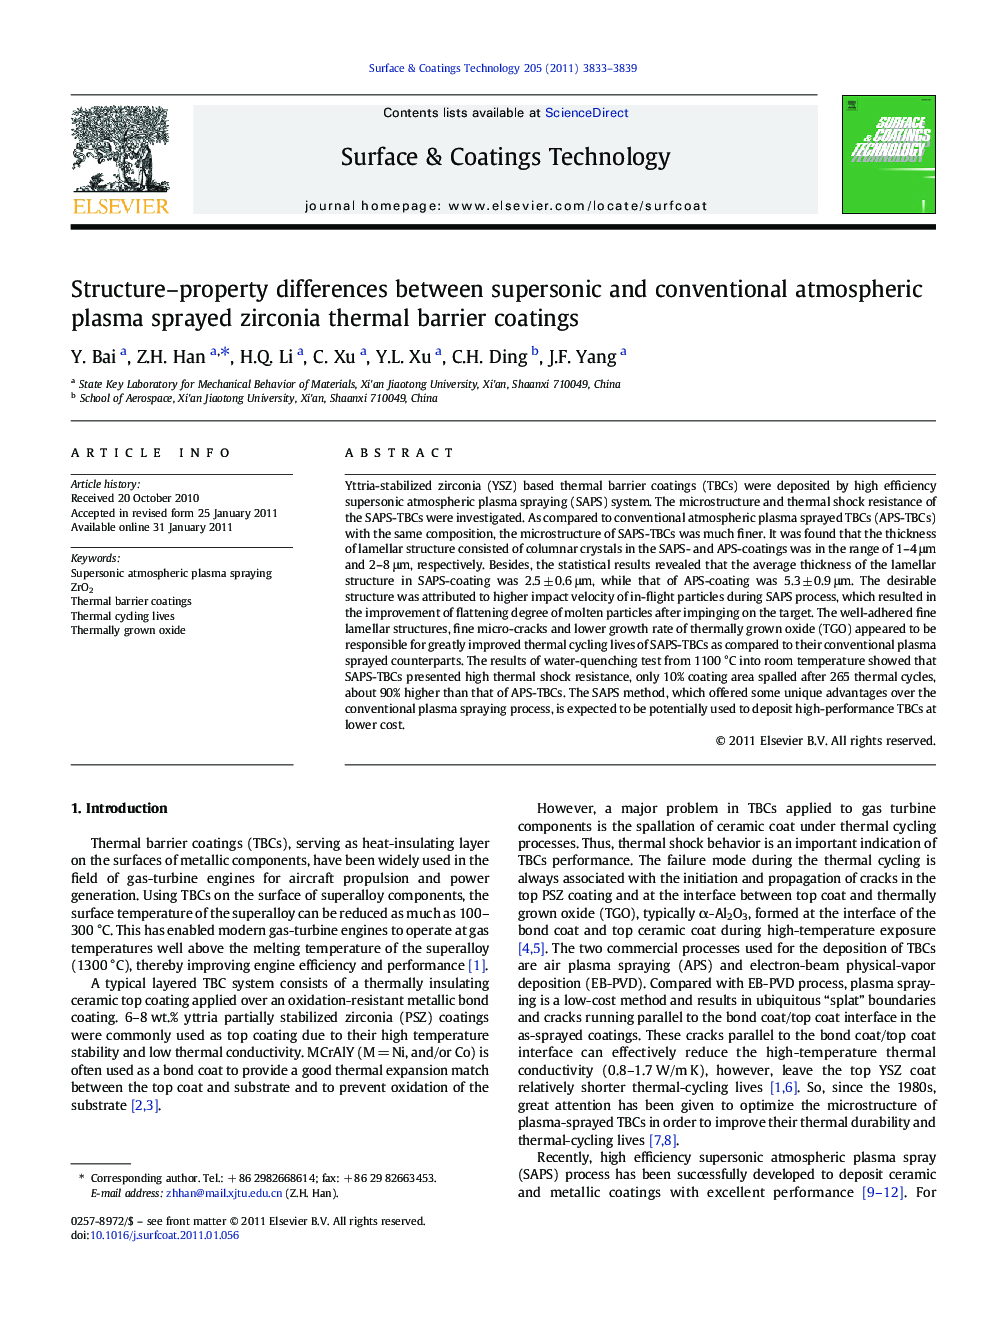 Structure-property differences between supersonic and conventional atmospheric plasma sprayed zirconia thermal barrier coatings